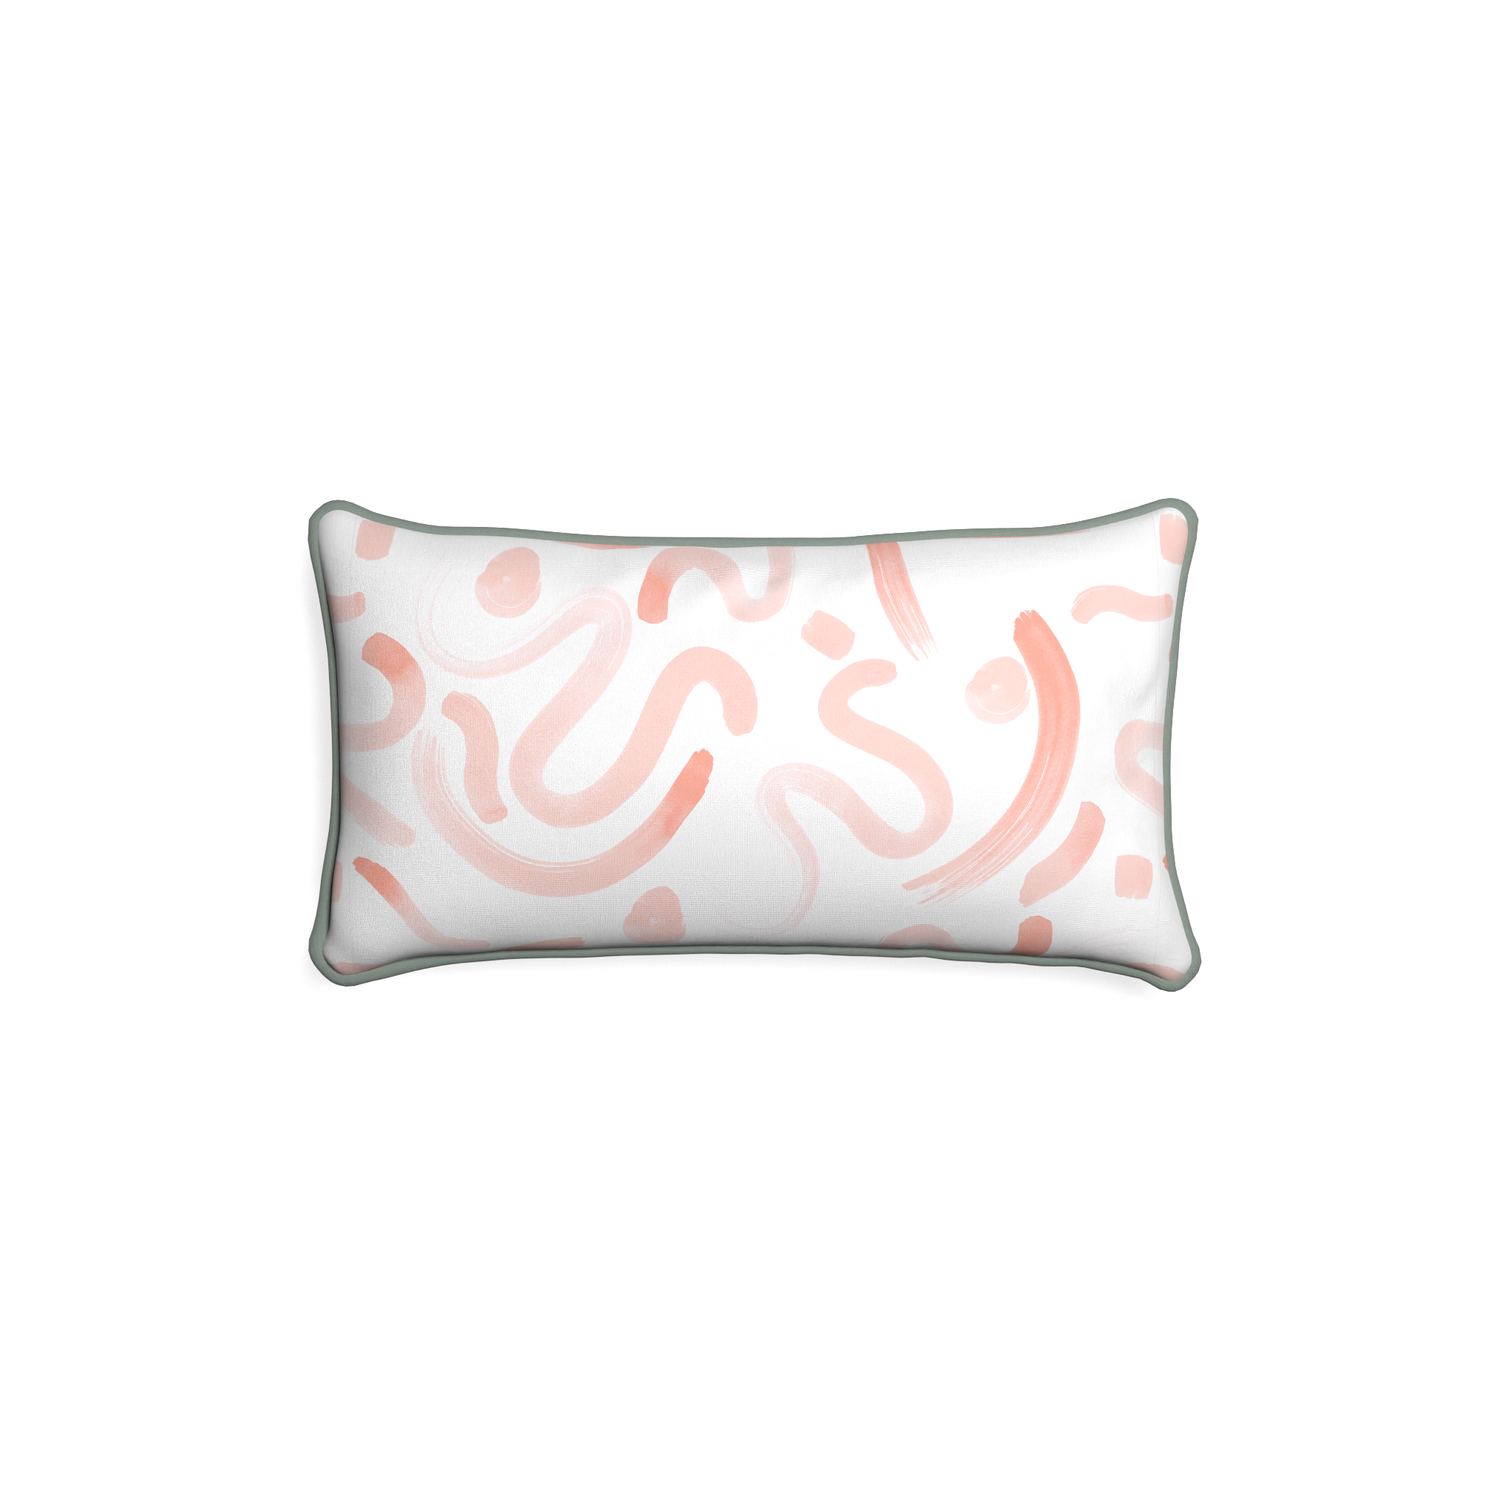 Petite-lumbar hockney pink custom pink graphicpillow with sage piping on white background